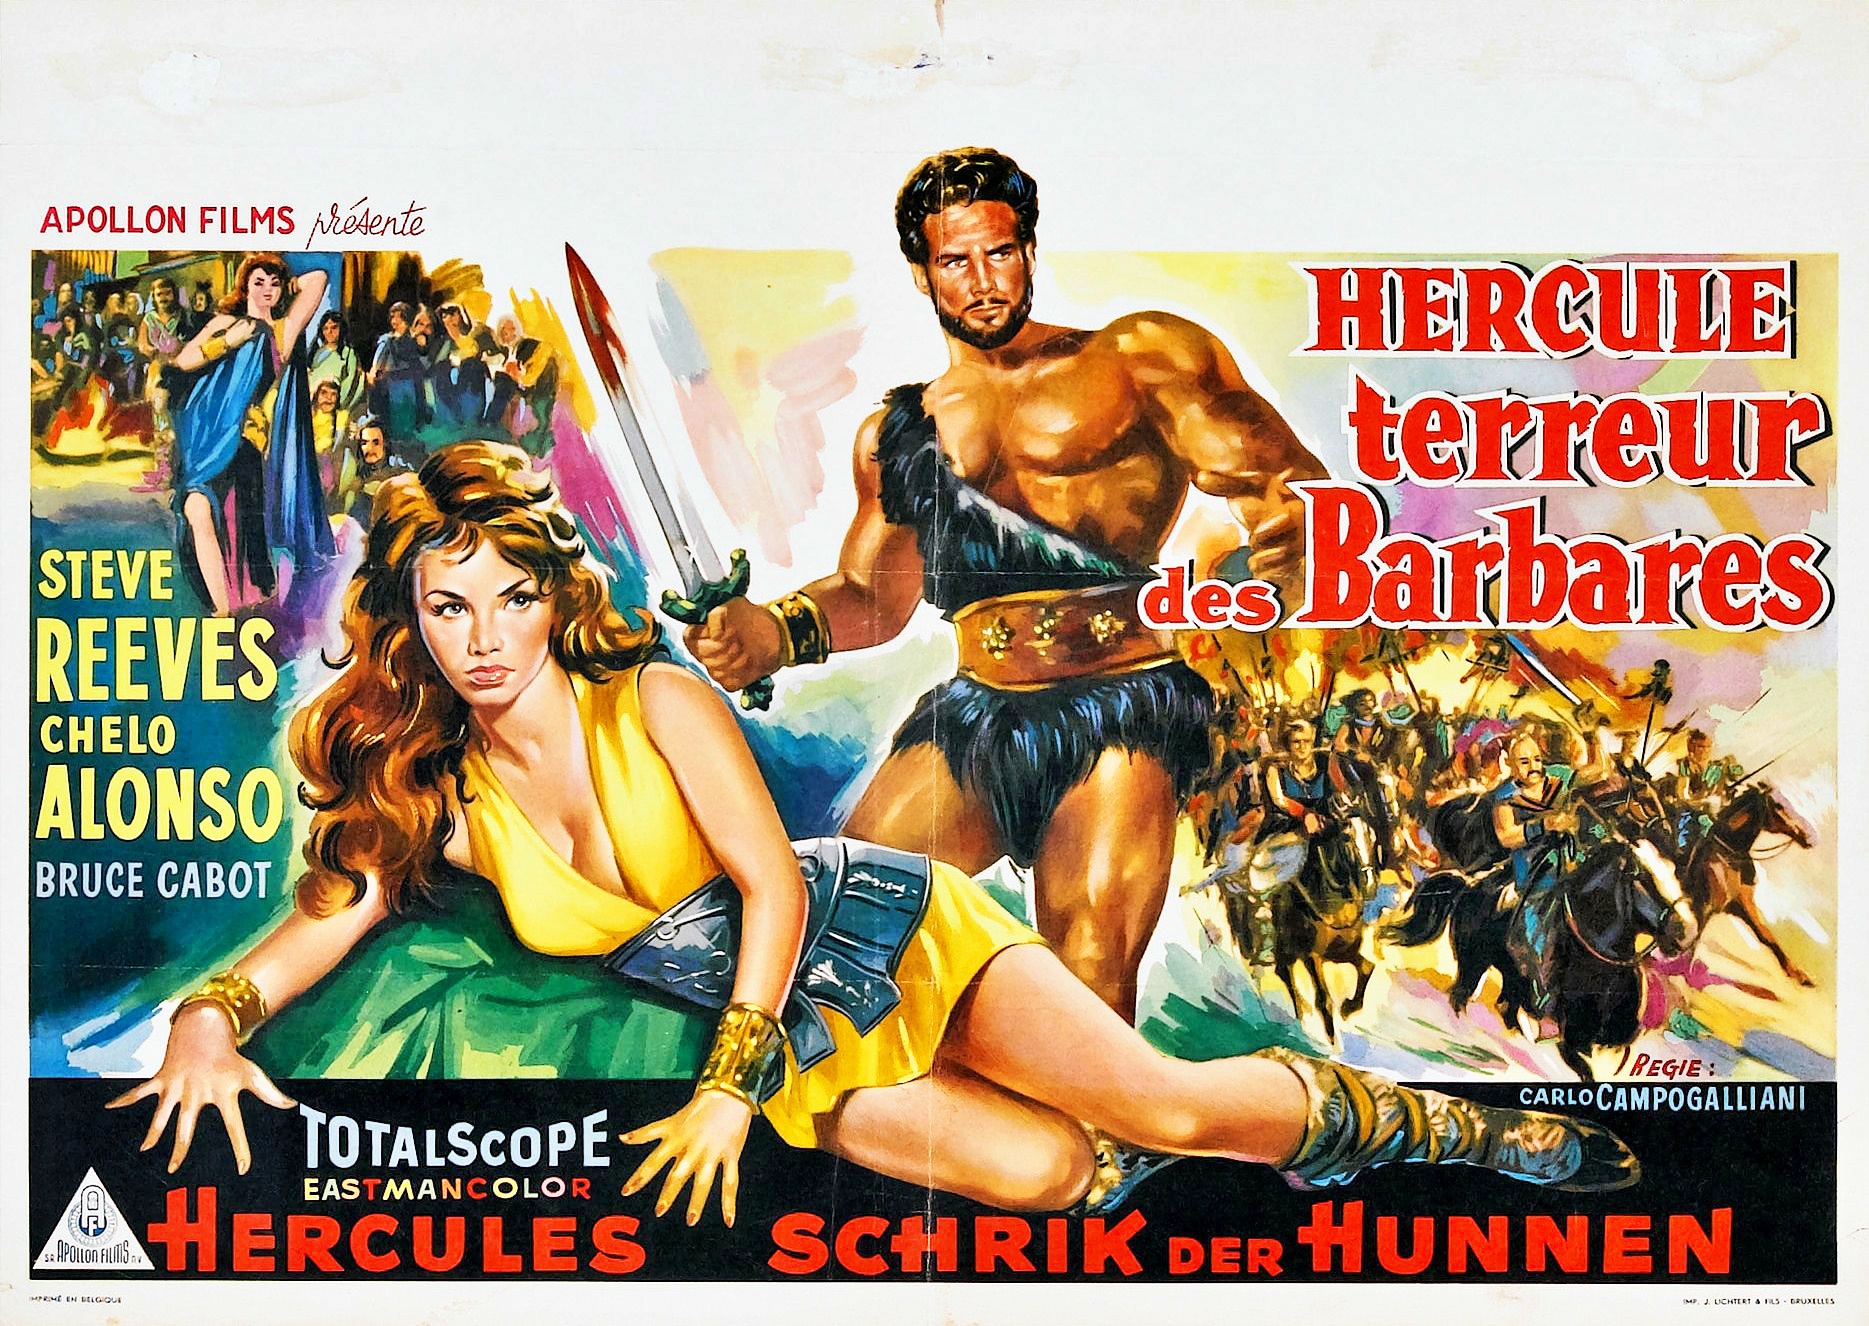 goliath_and_barbarians_poster_02.jpg